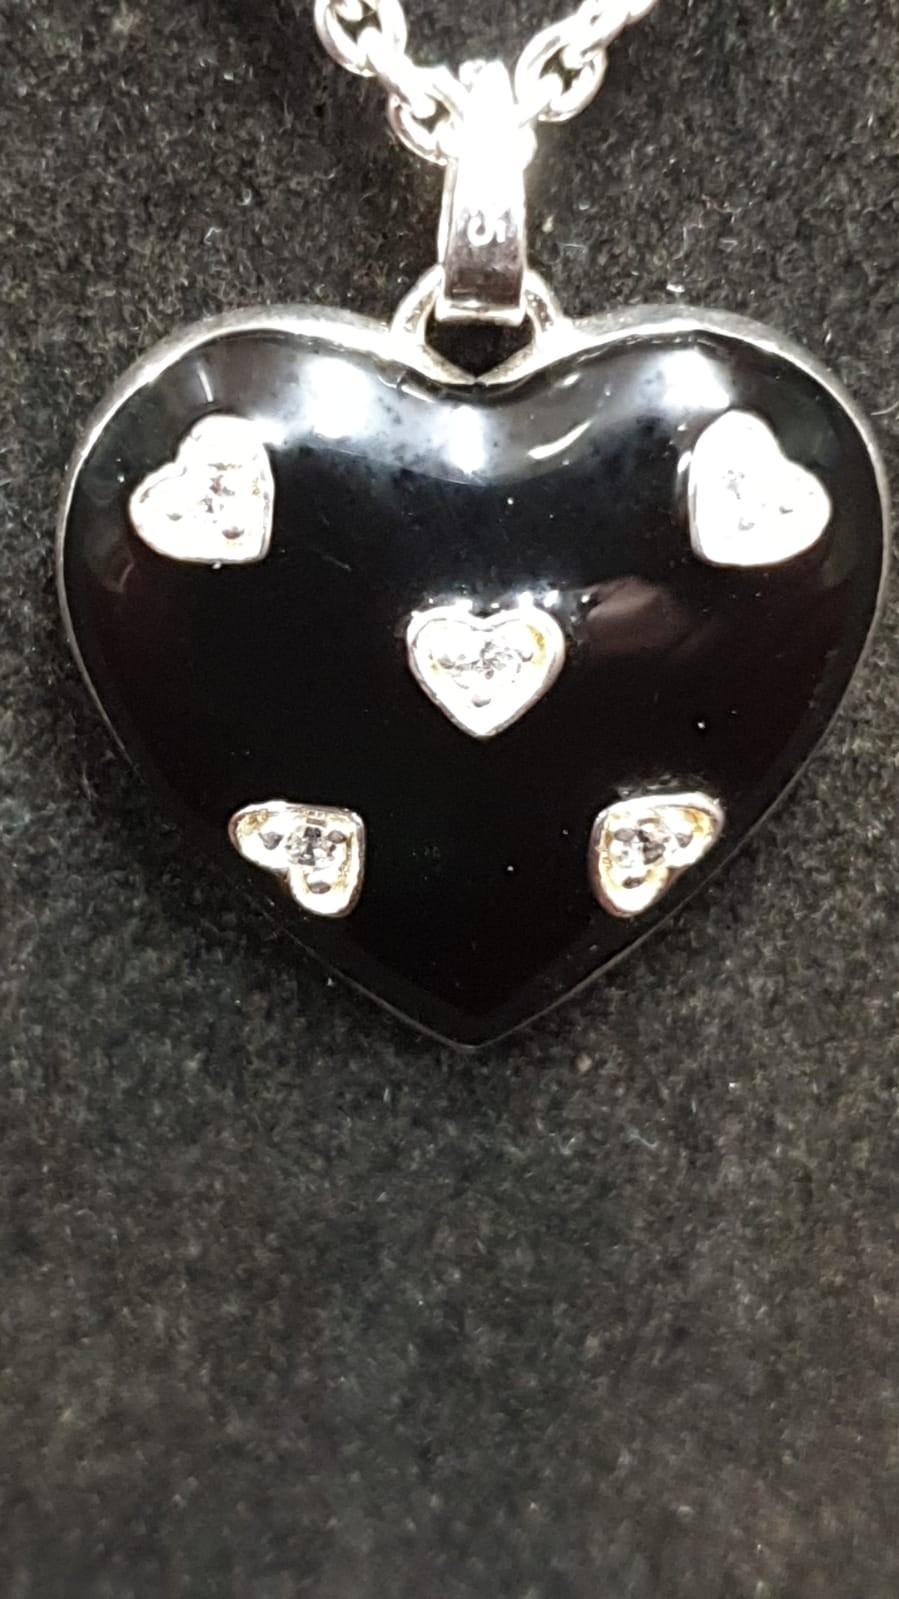 Good quality silver 925 belchar chain with silver and enamel heart pendant. - Image 2 of 2